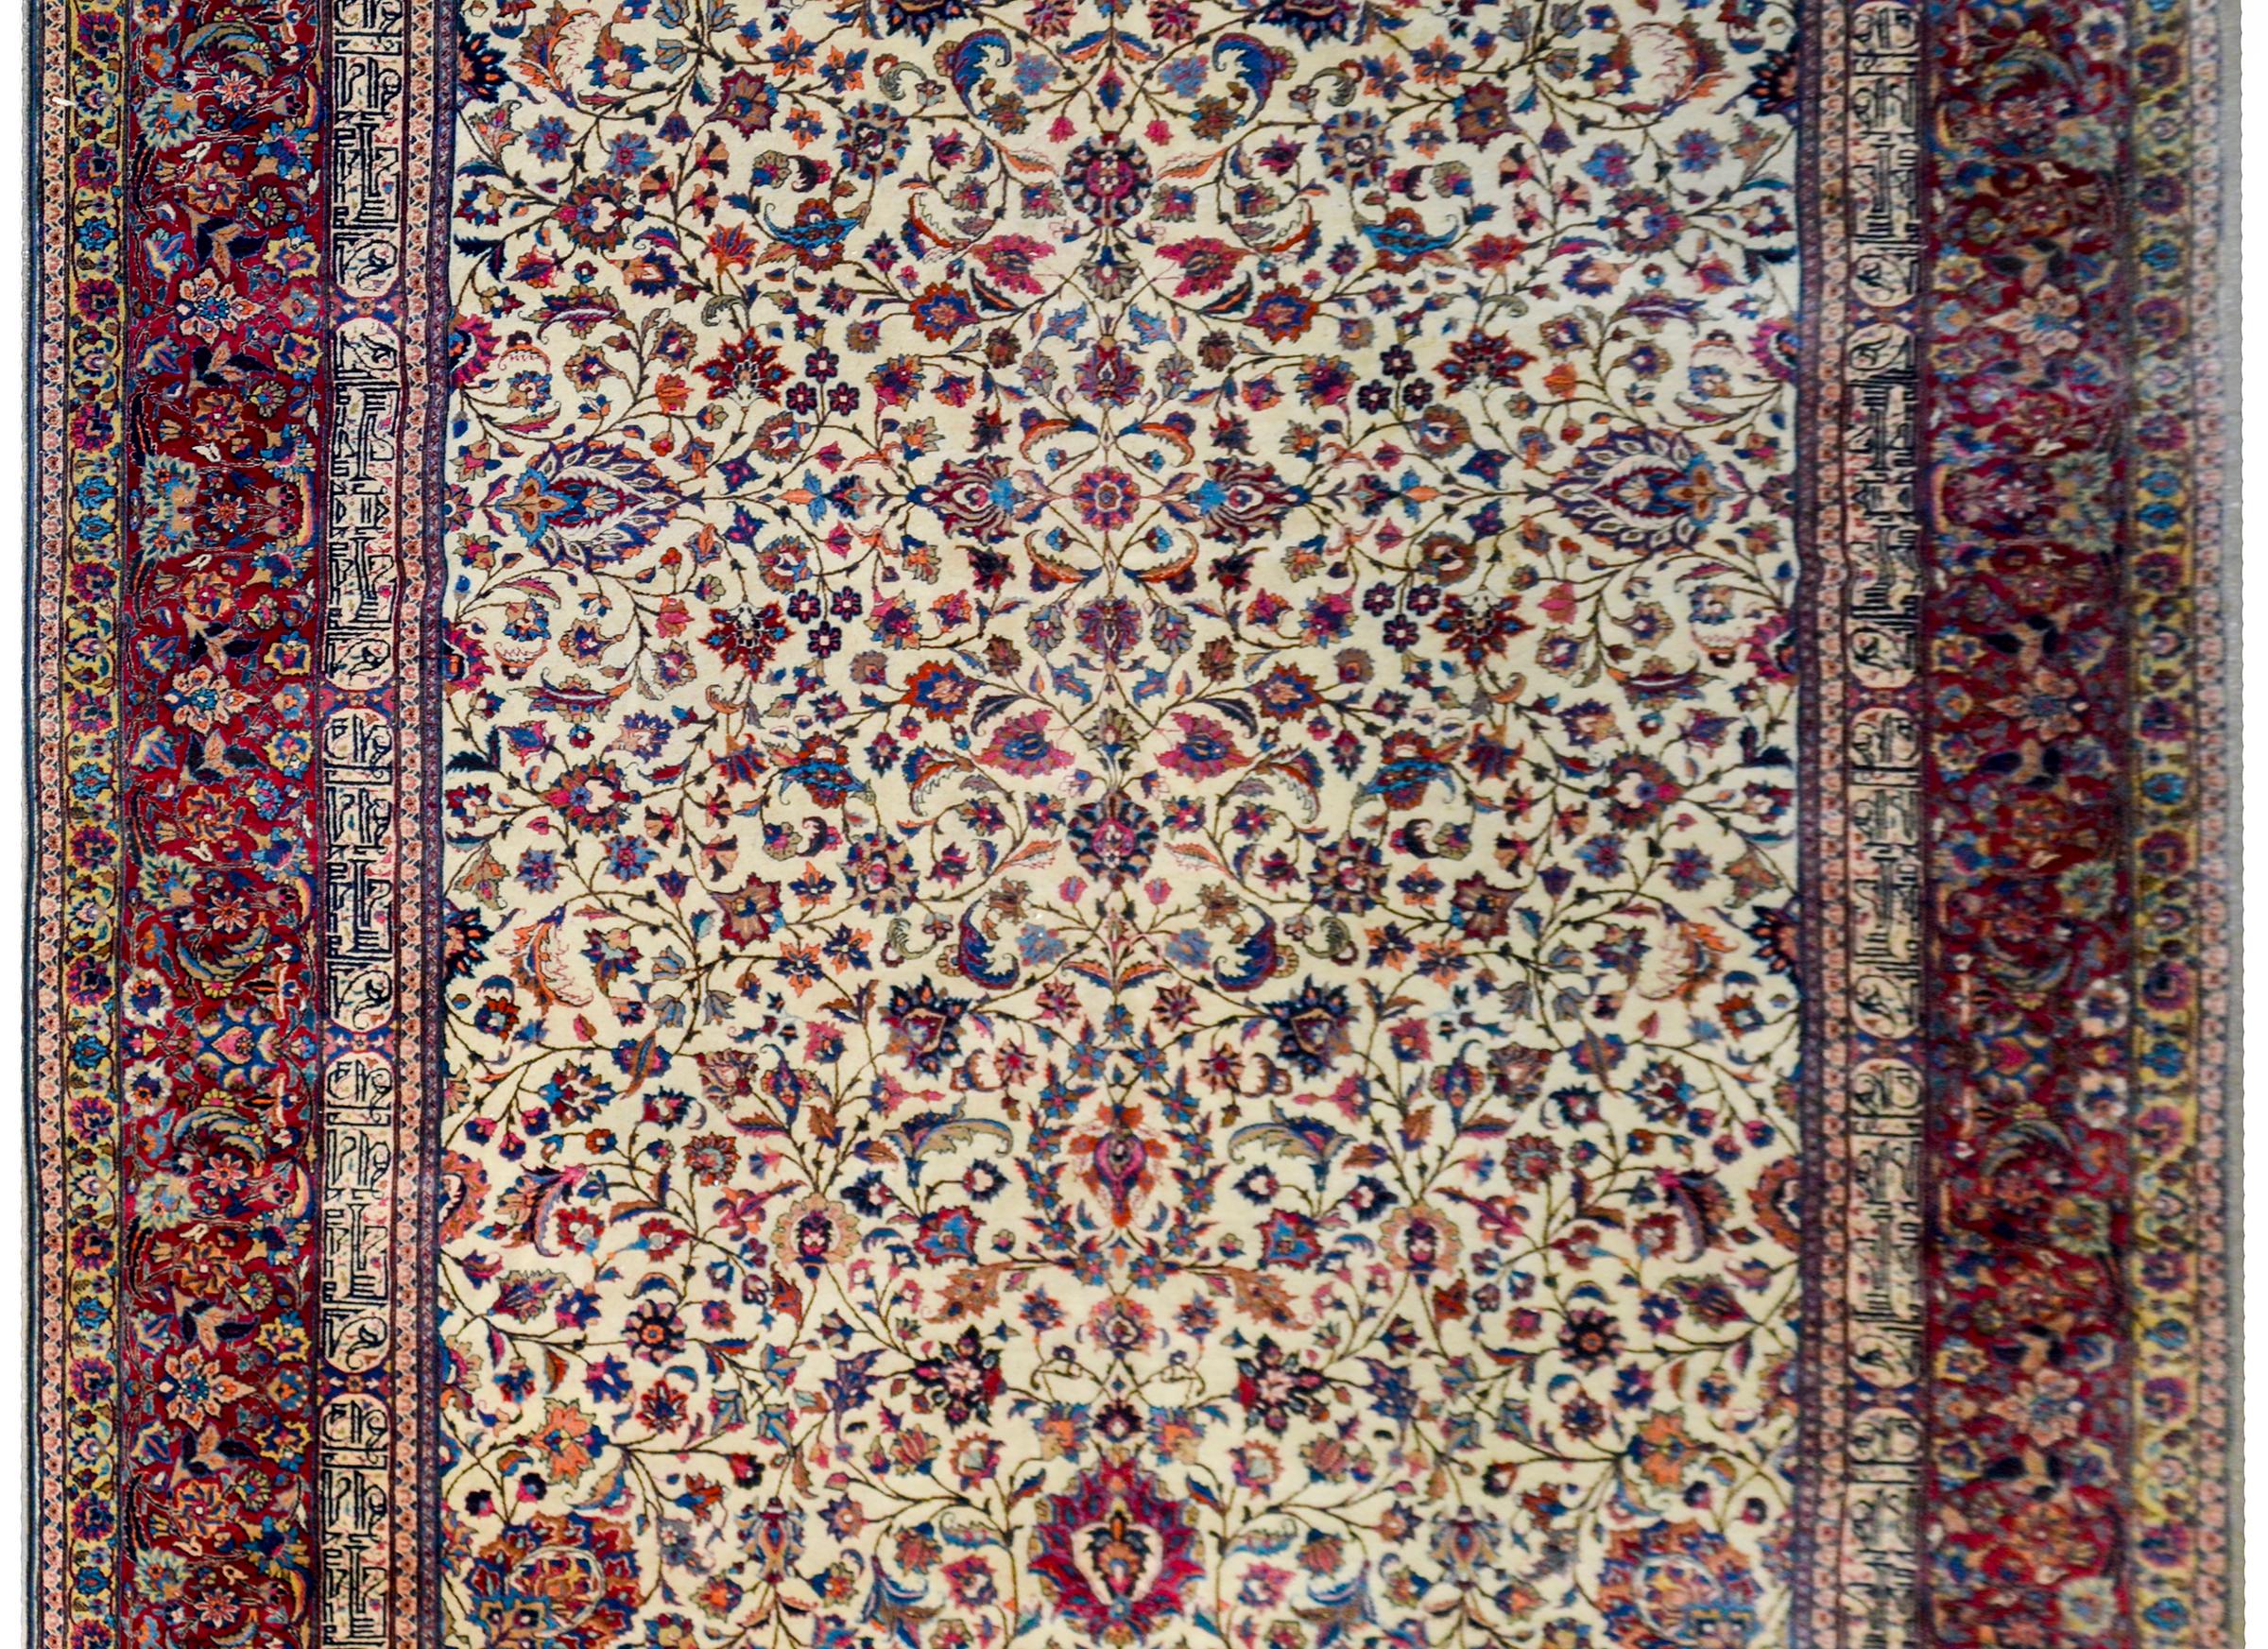 An incredible monumental early 20th century Meshed rug with a densely woven mirrored pattern of multicolored flowering scrolling vines woven in light and dark indigo, pink, orange, crimson, brown, and black wool on a natural cream colored wool